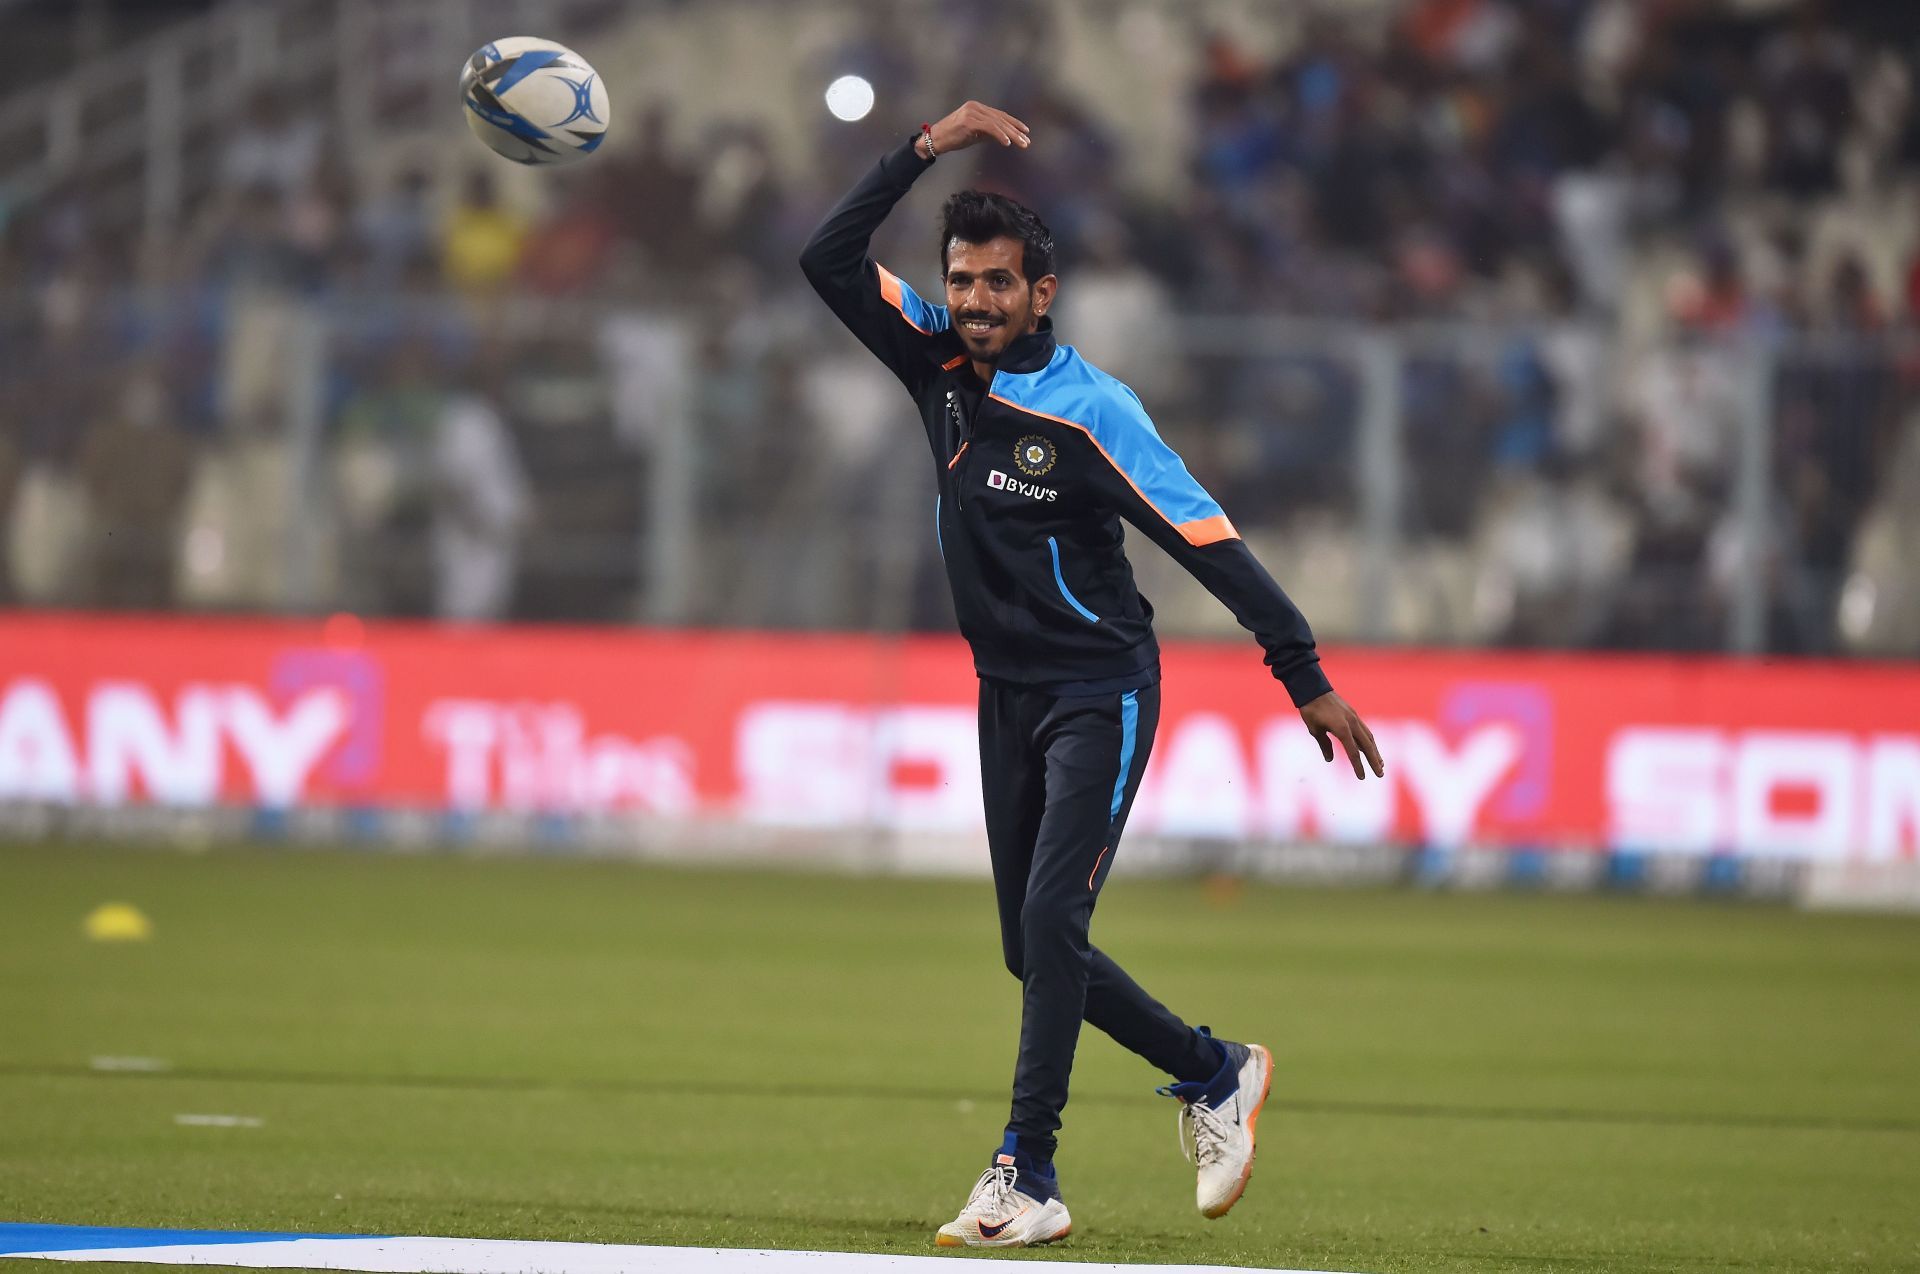 Chahal was adjudged the player of the match in the 1st ODI against the West Indies.